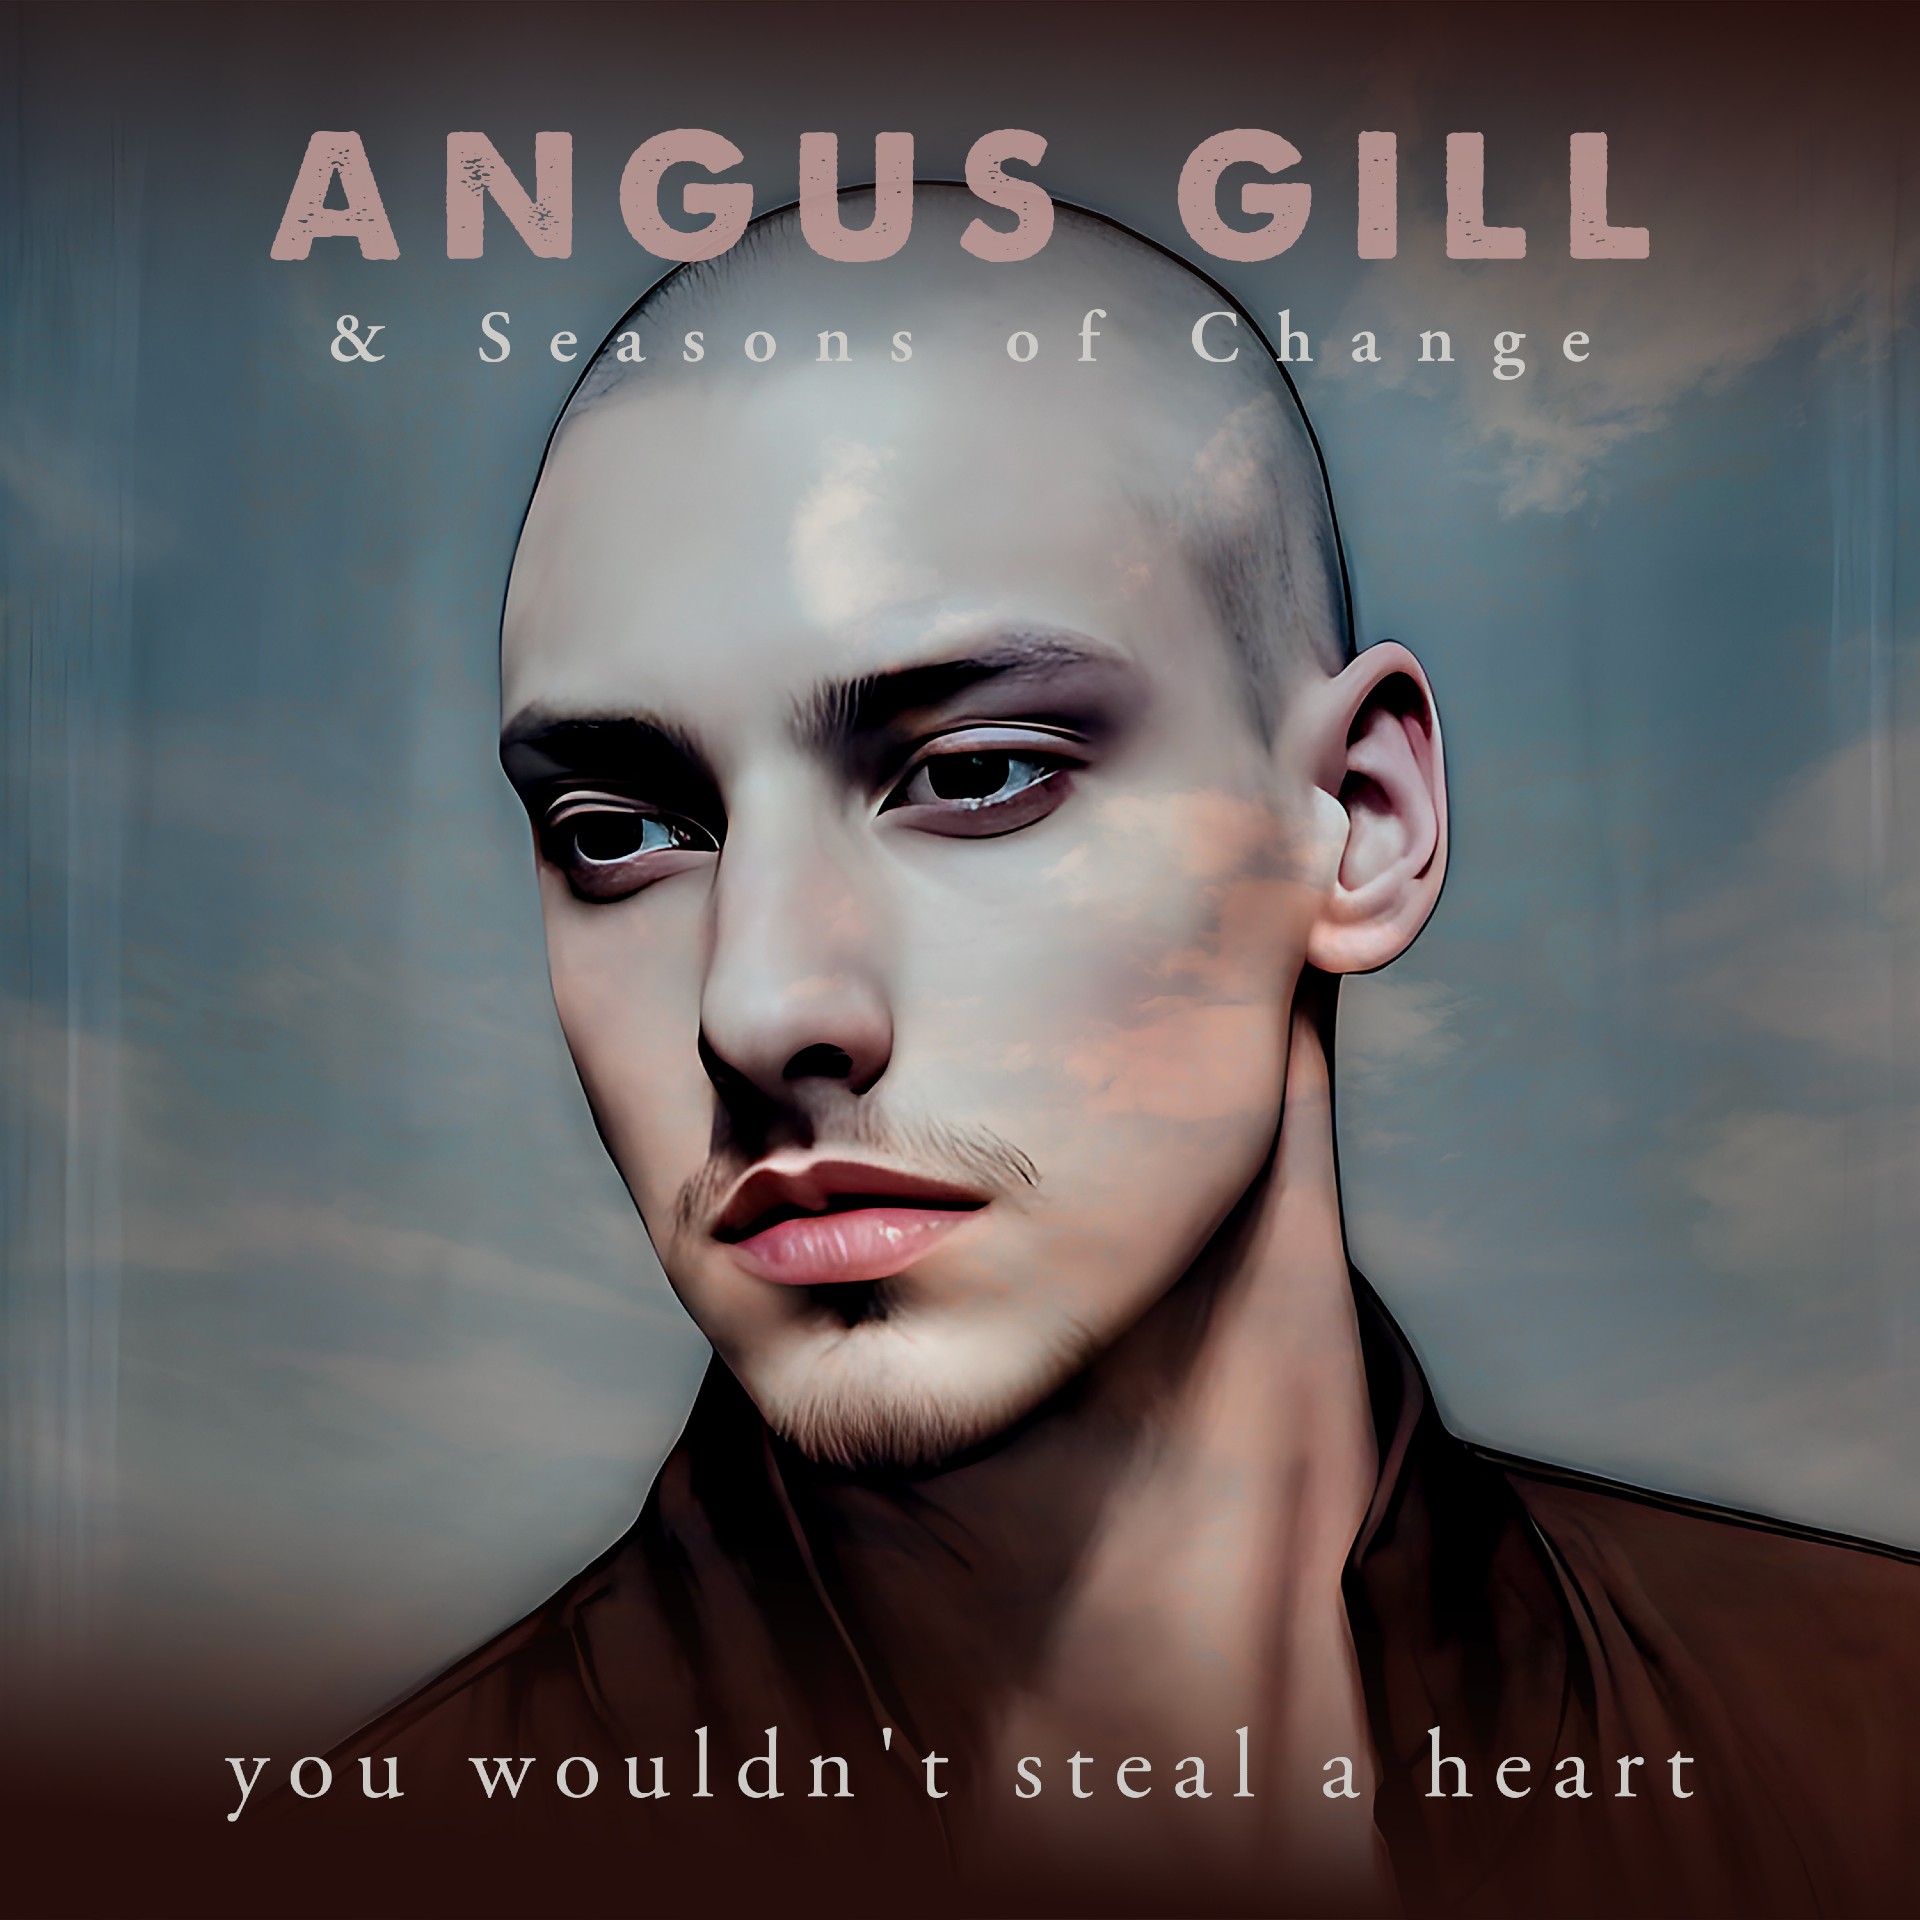 Angus Gill “You Wouldn’t Steal A Heart” single artwork